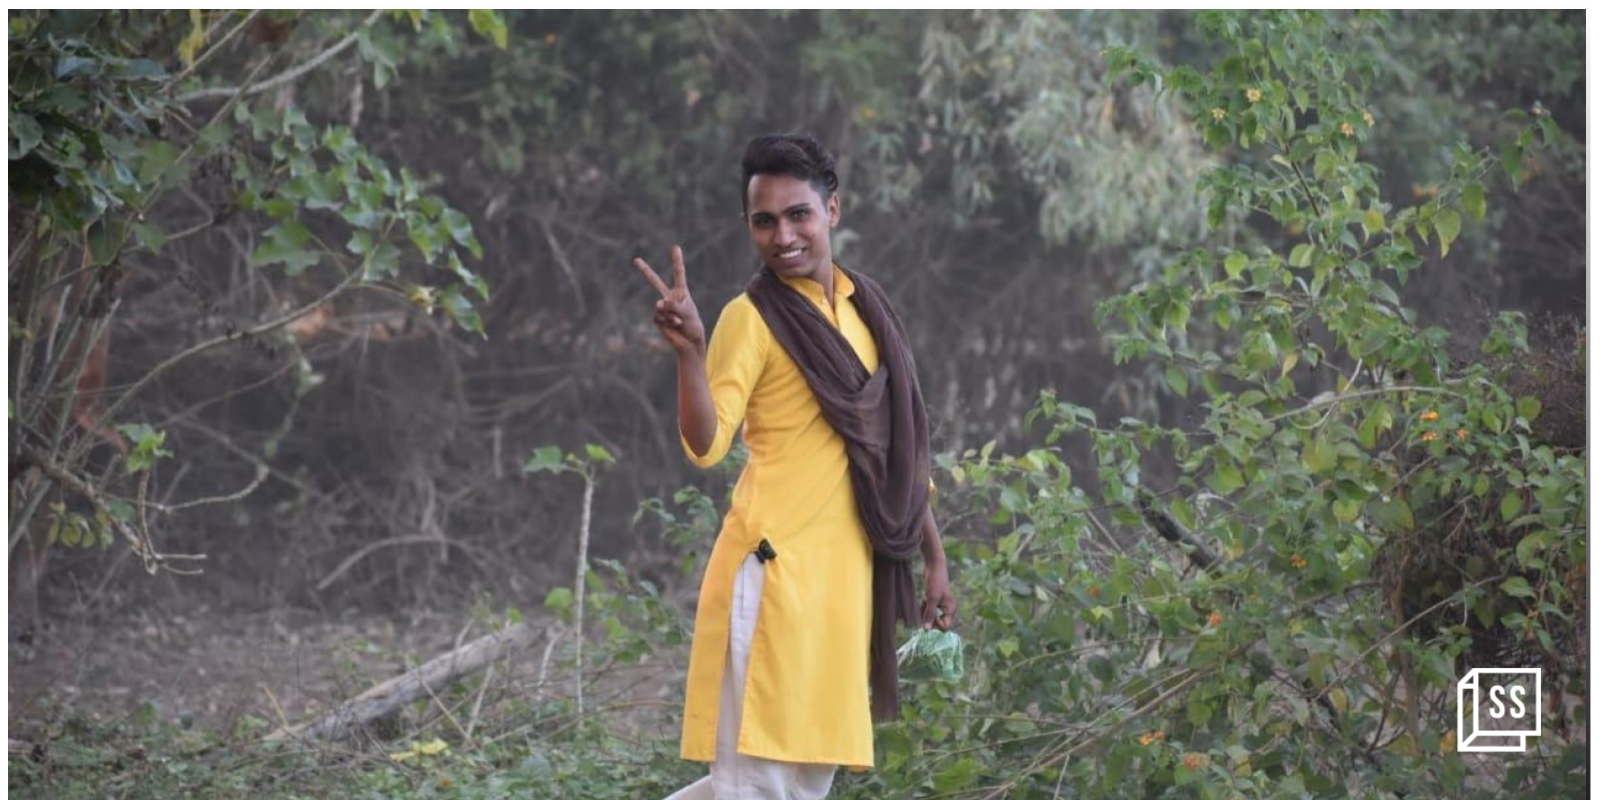 Tribal, trans, and leader: This young crusader from Haridwar is a guiding light to her community